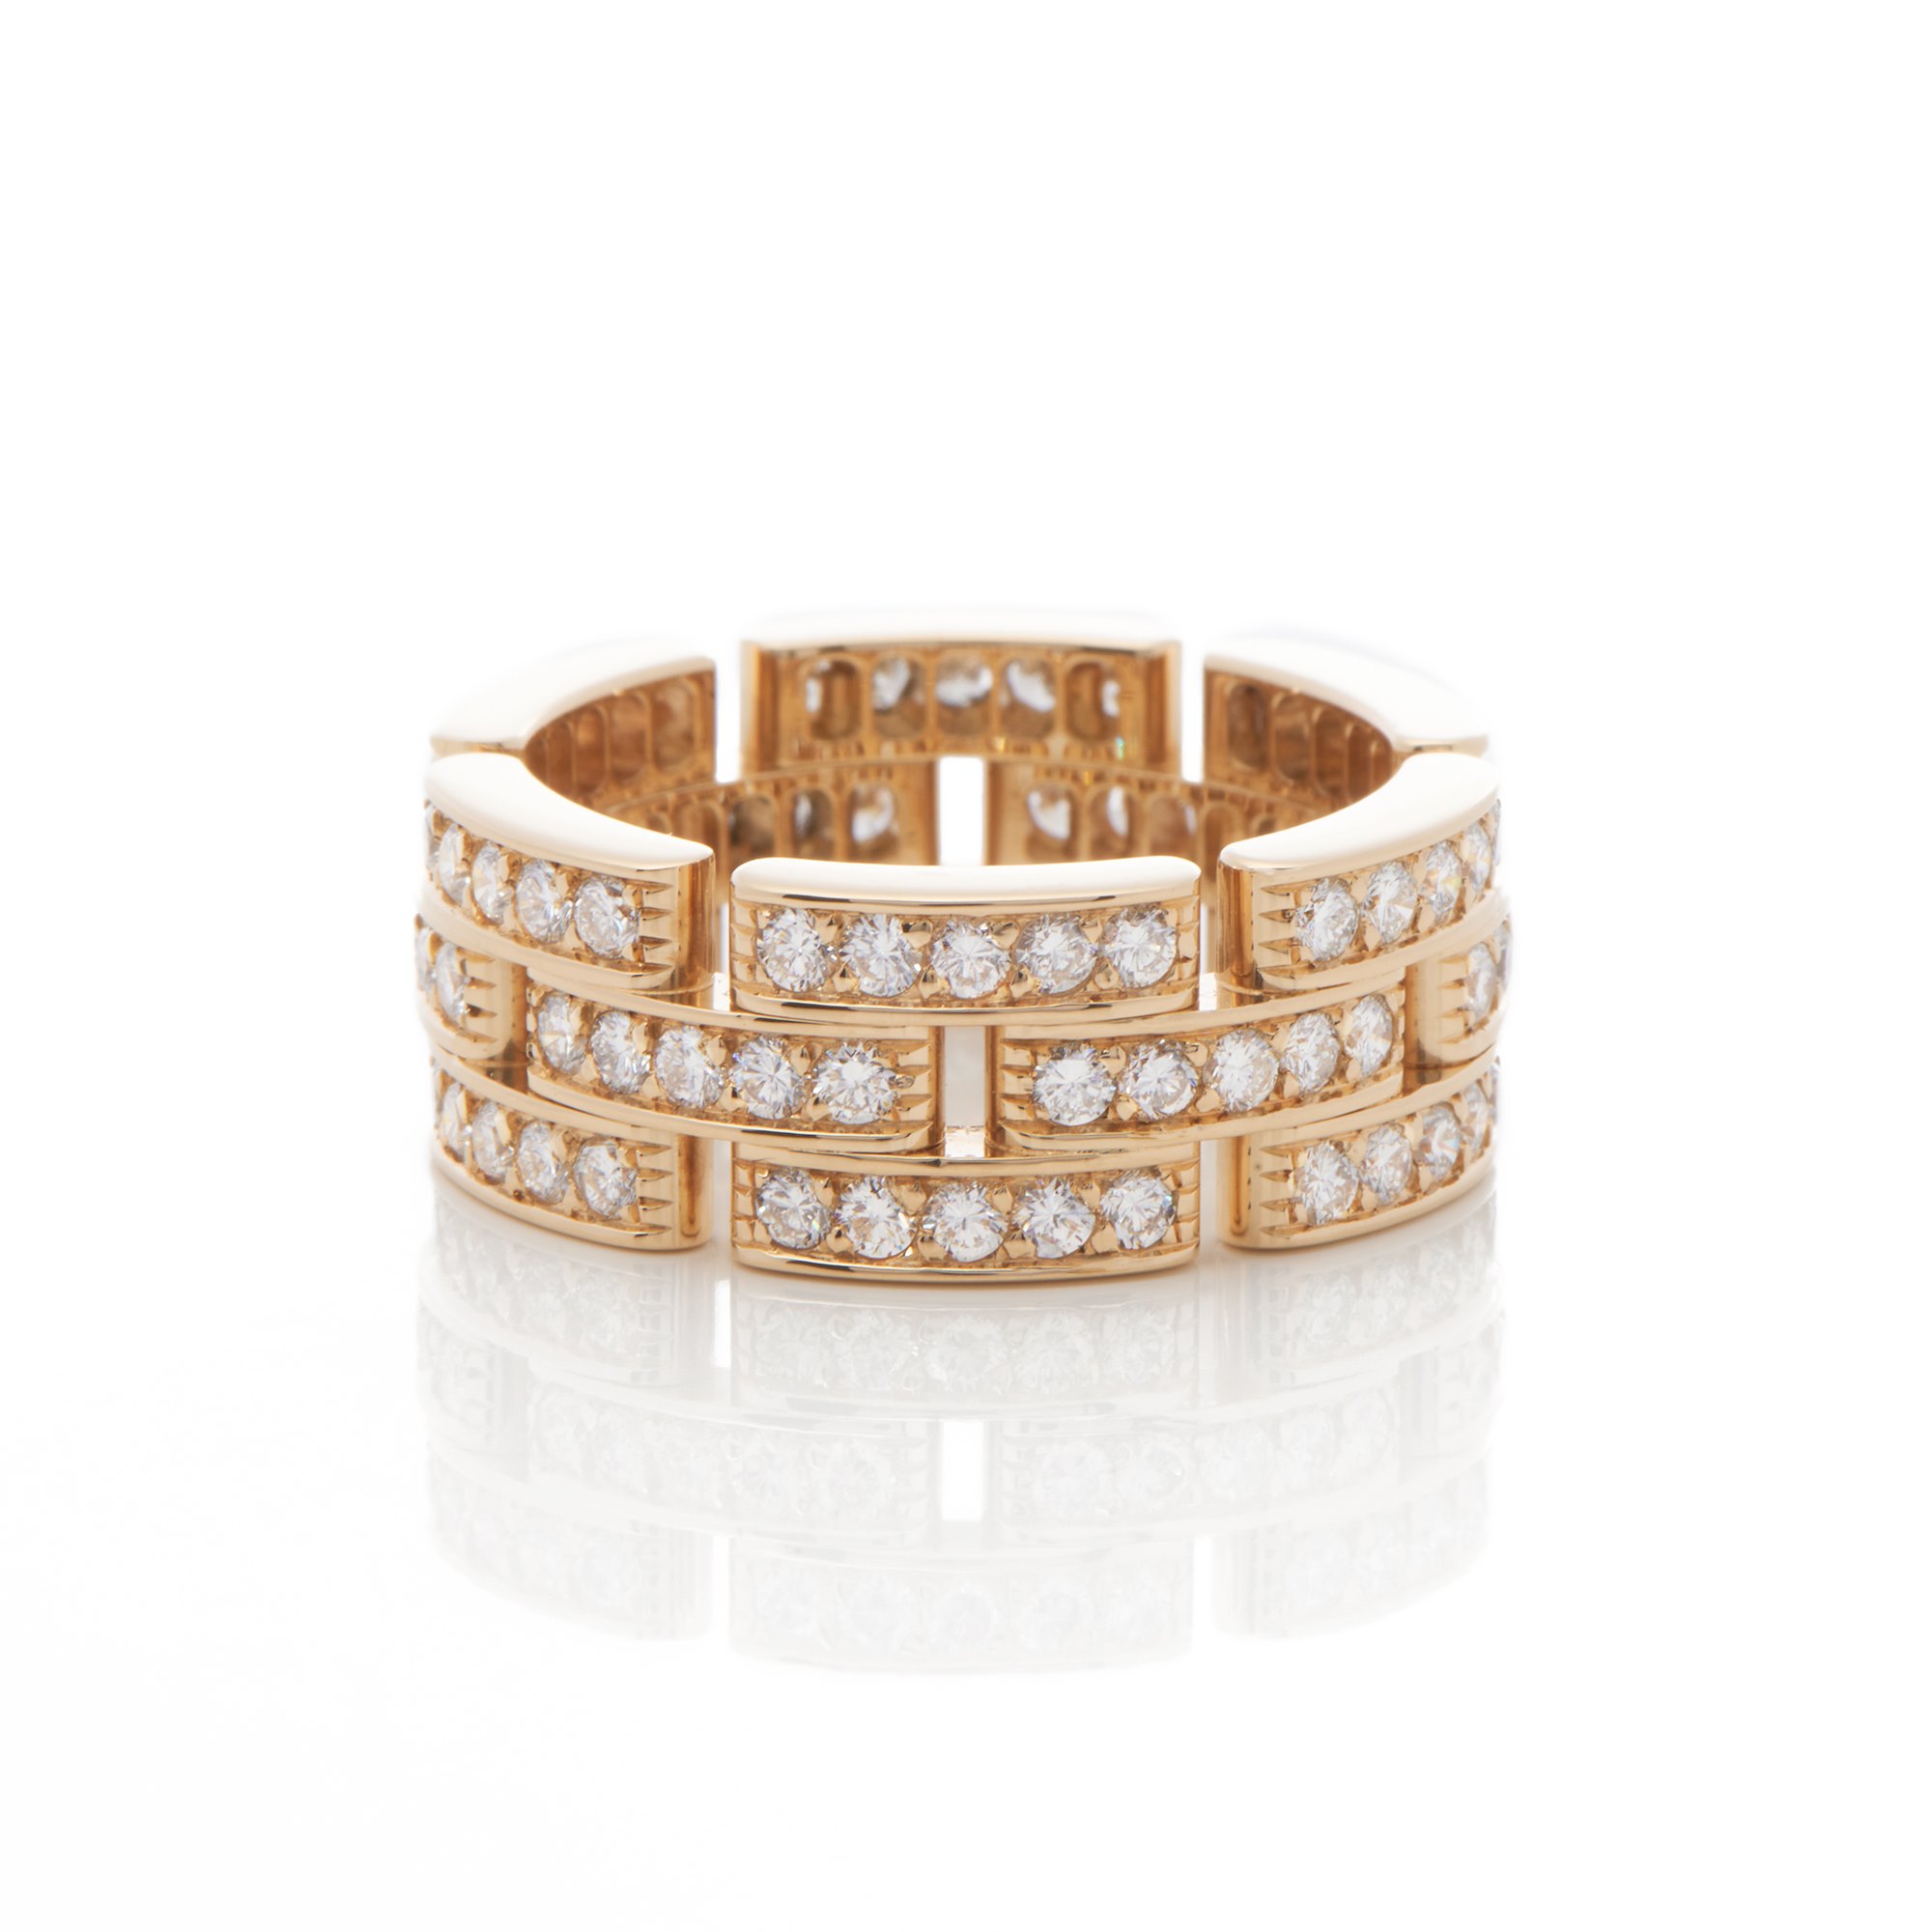 Cartier Maillon Panthere Diamond Ring